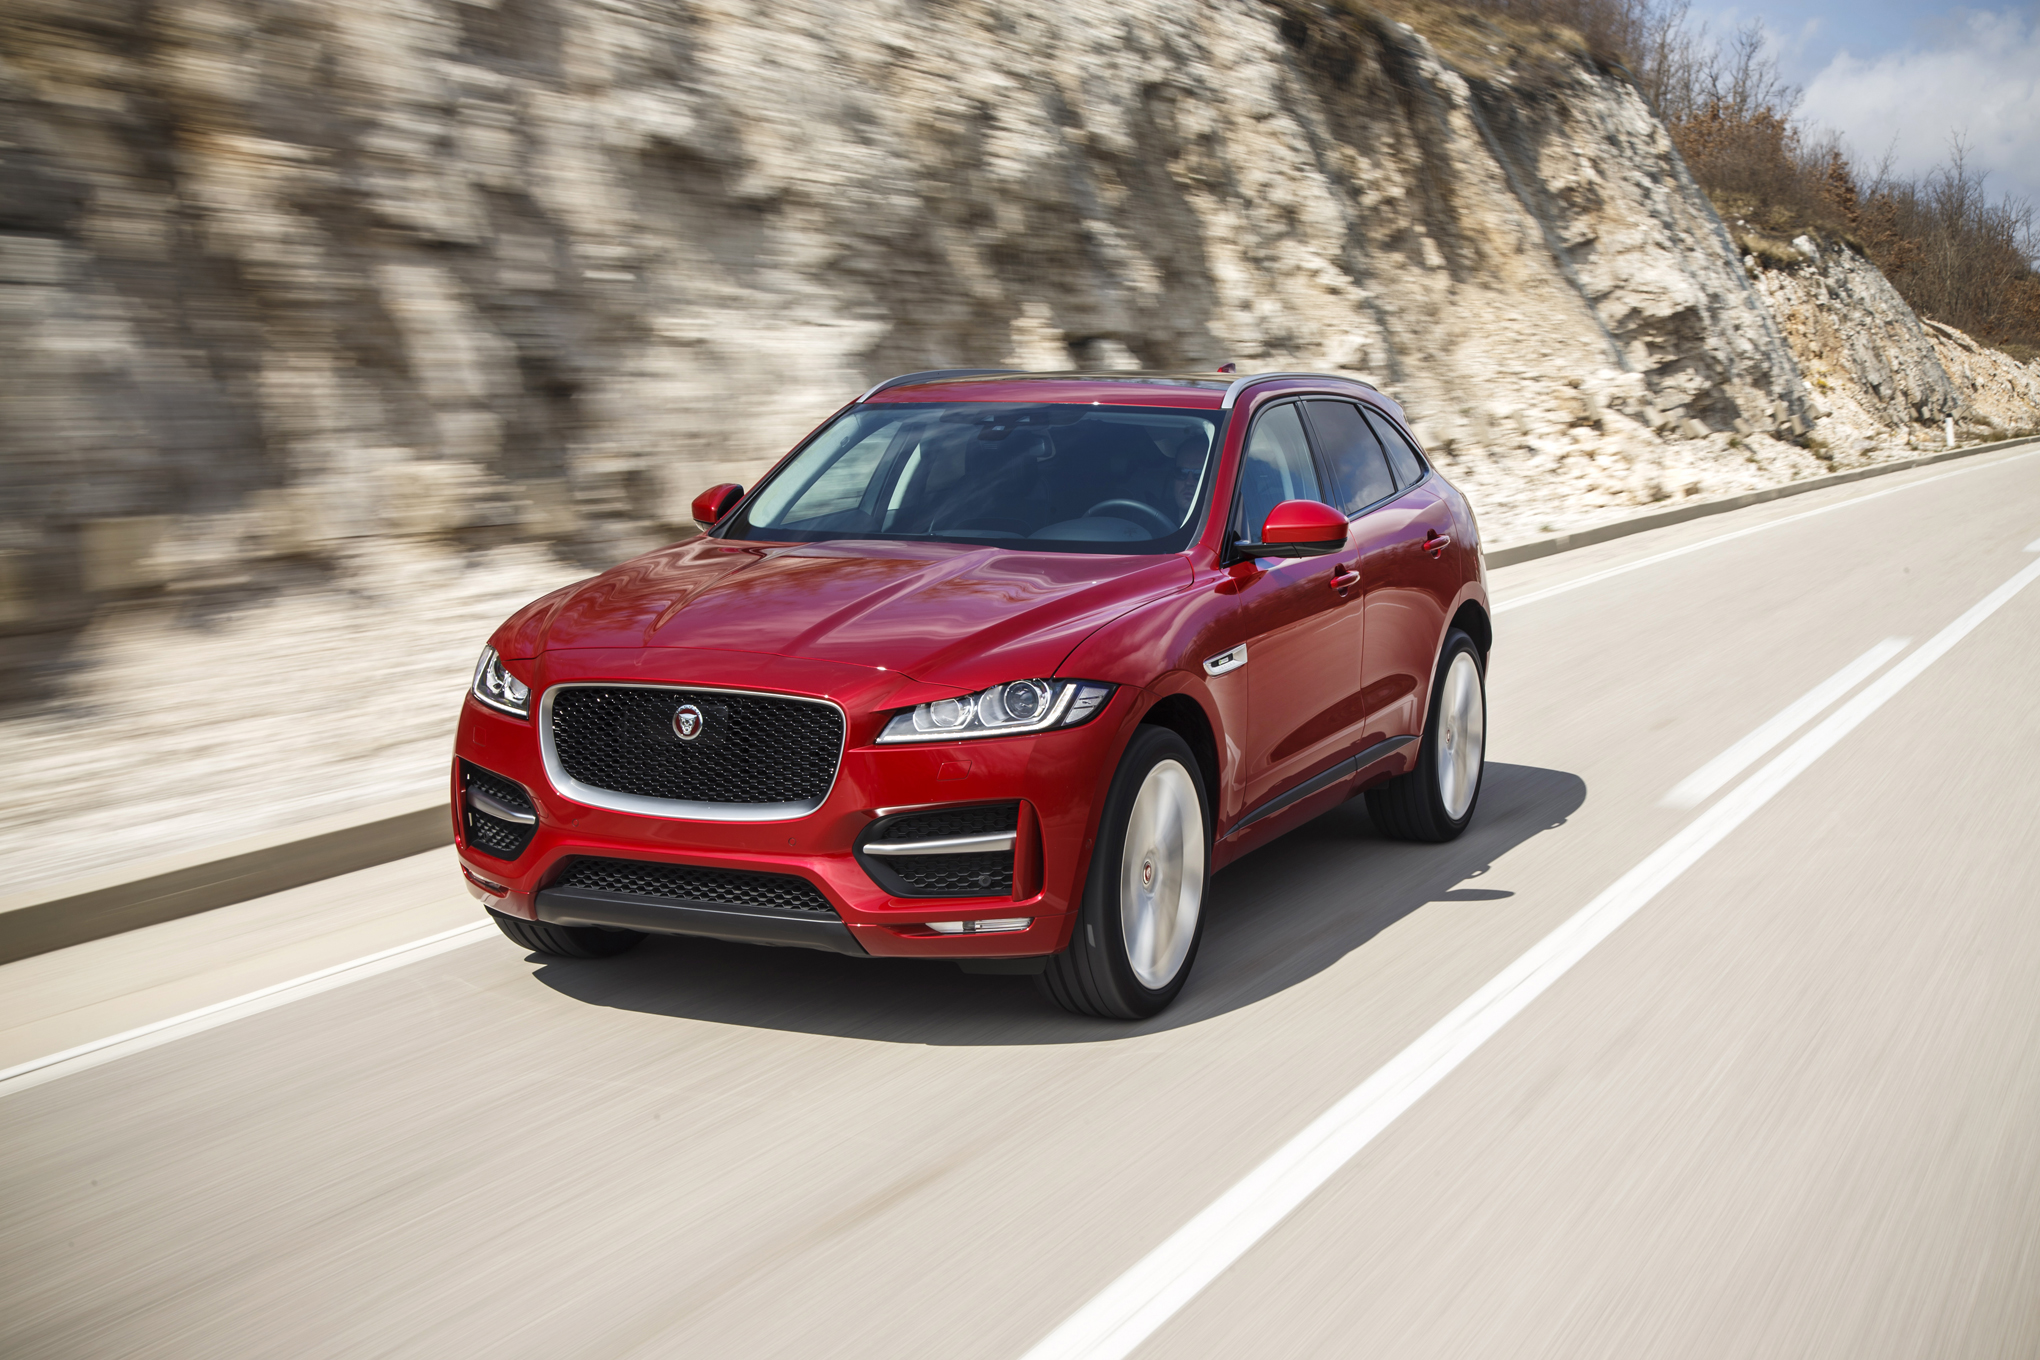 2017-Jaguar-F-Pace-First-Edition-front-three-quarter-in-motion-05-2.jpg